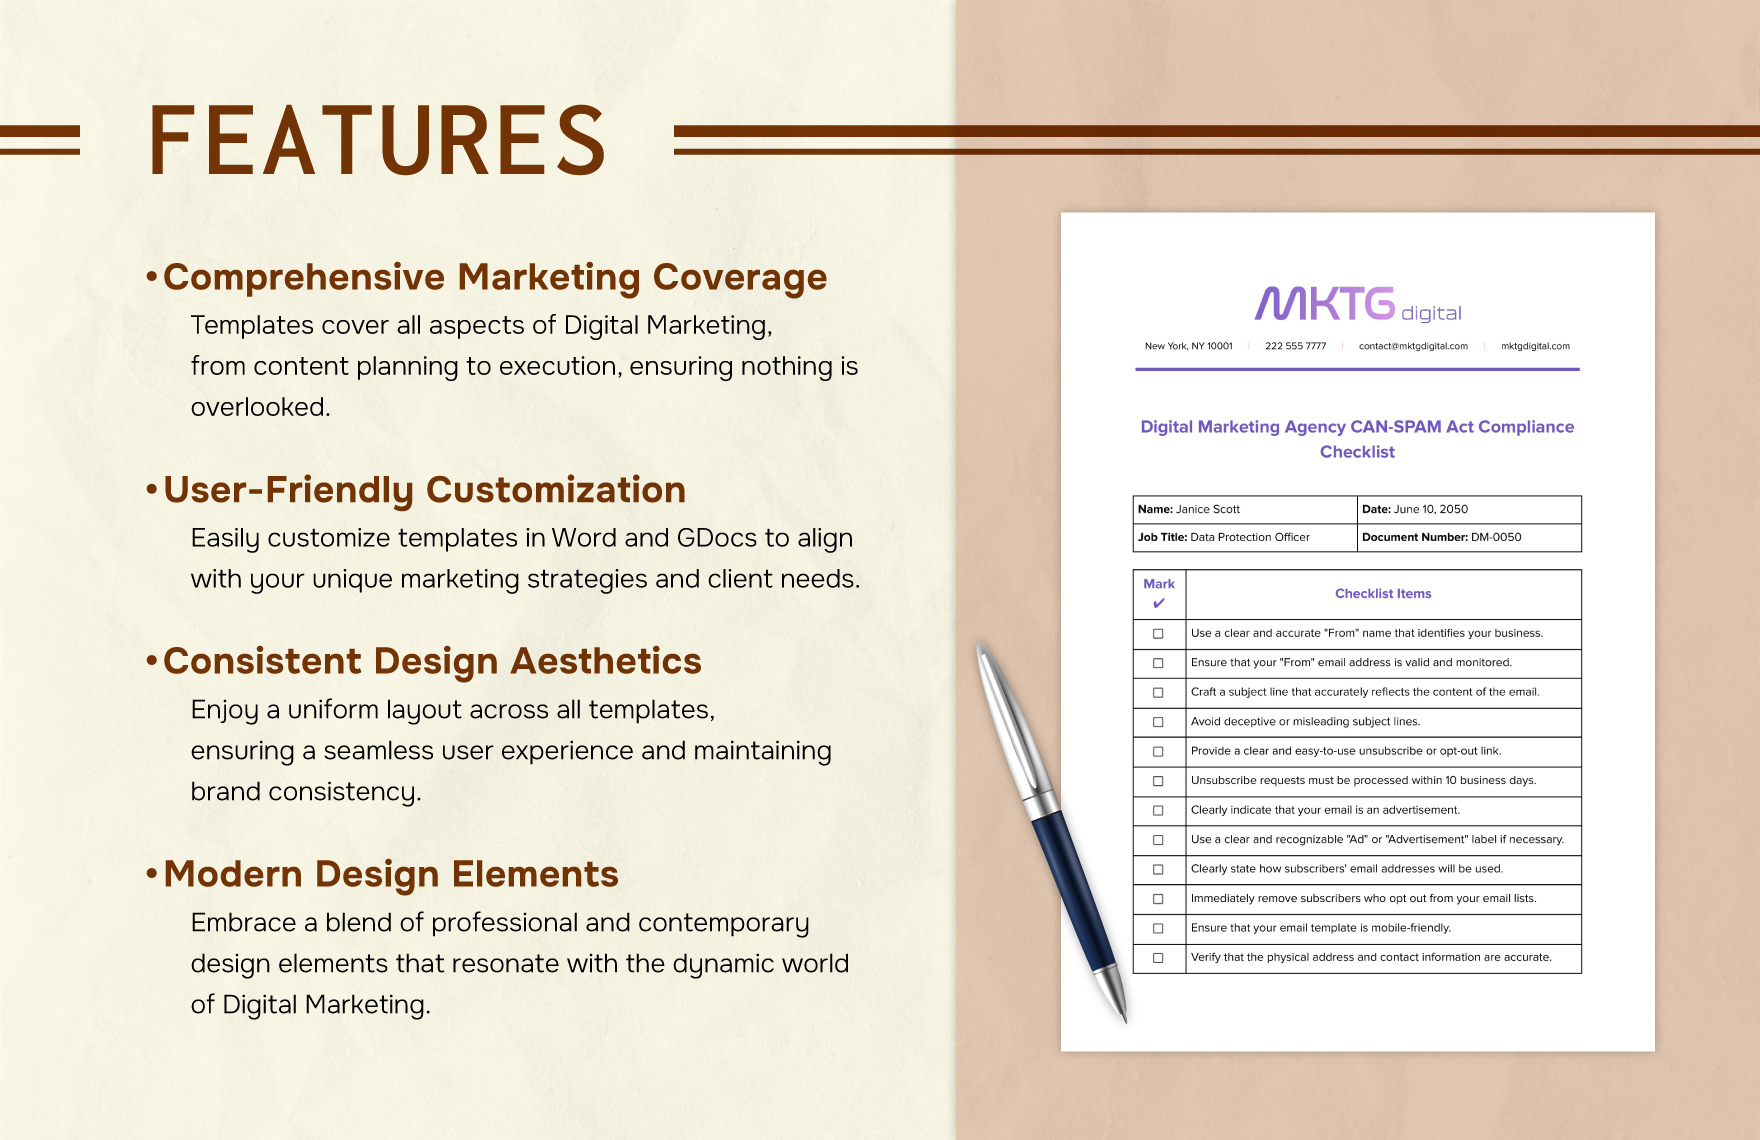 Digital Marketing Agency CAN-SPAM Act Compliance Checklist Template